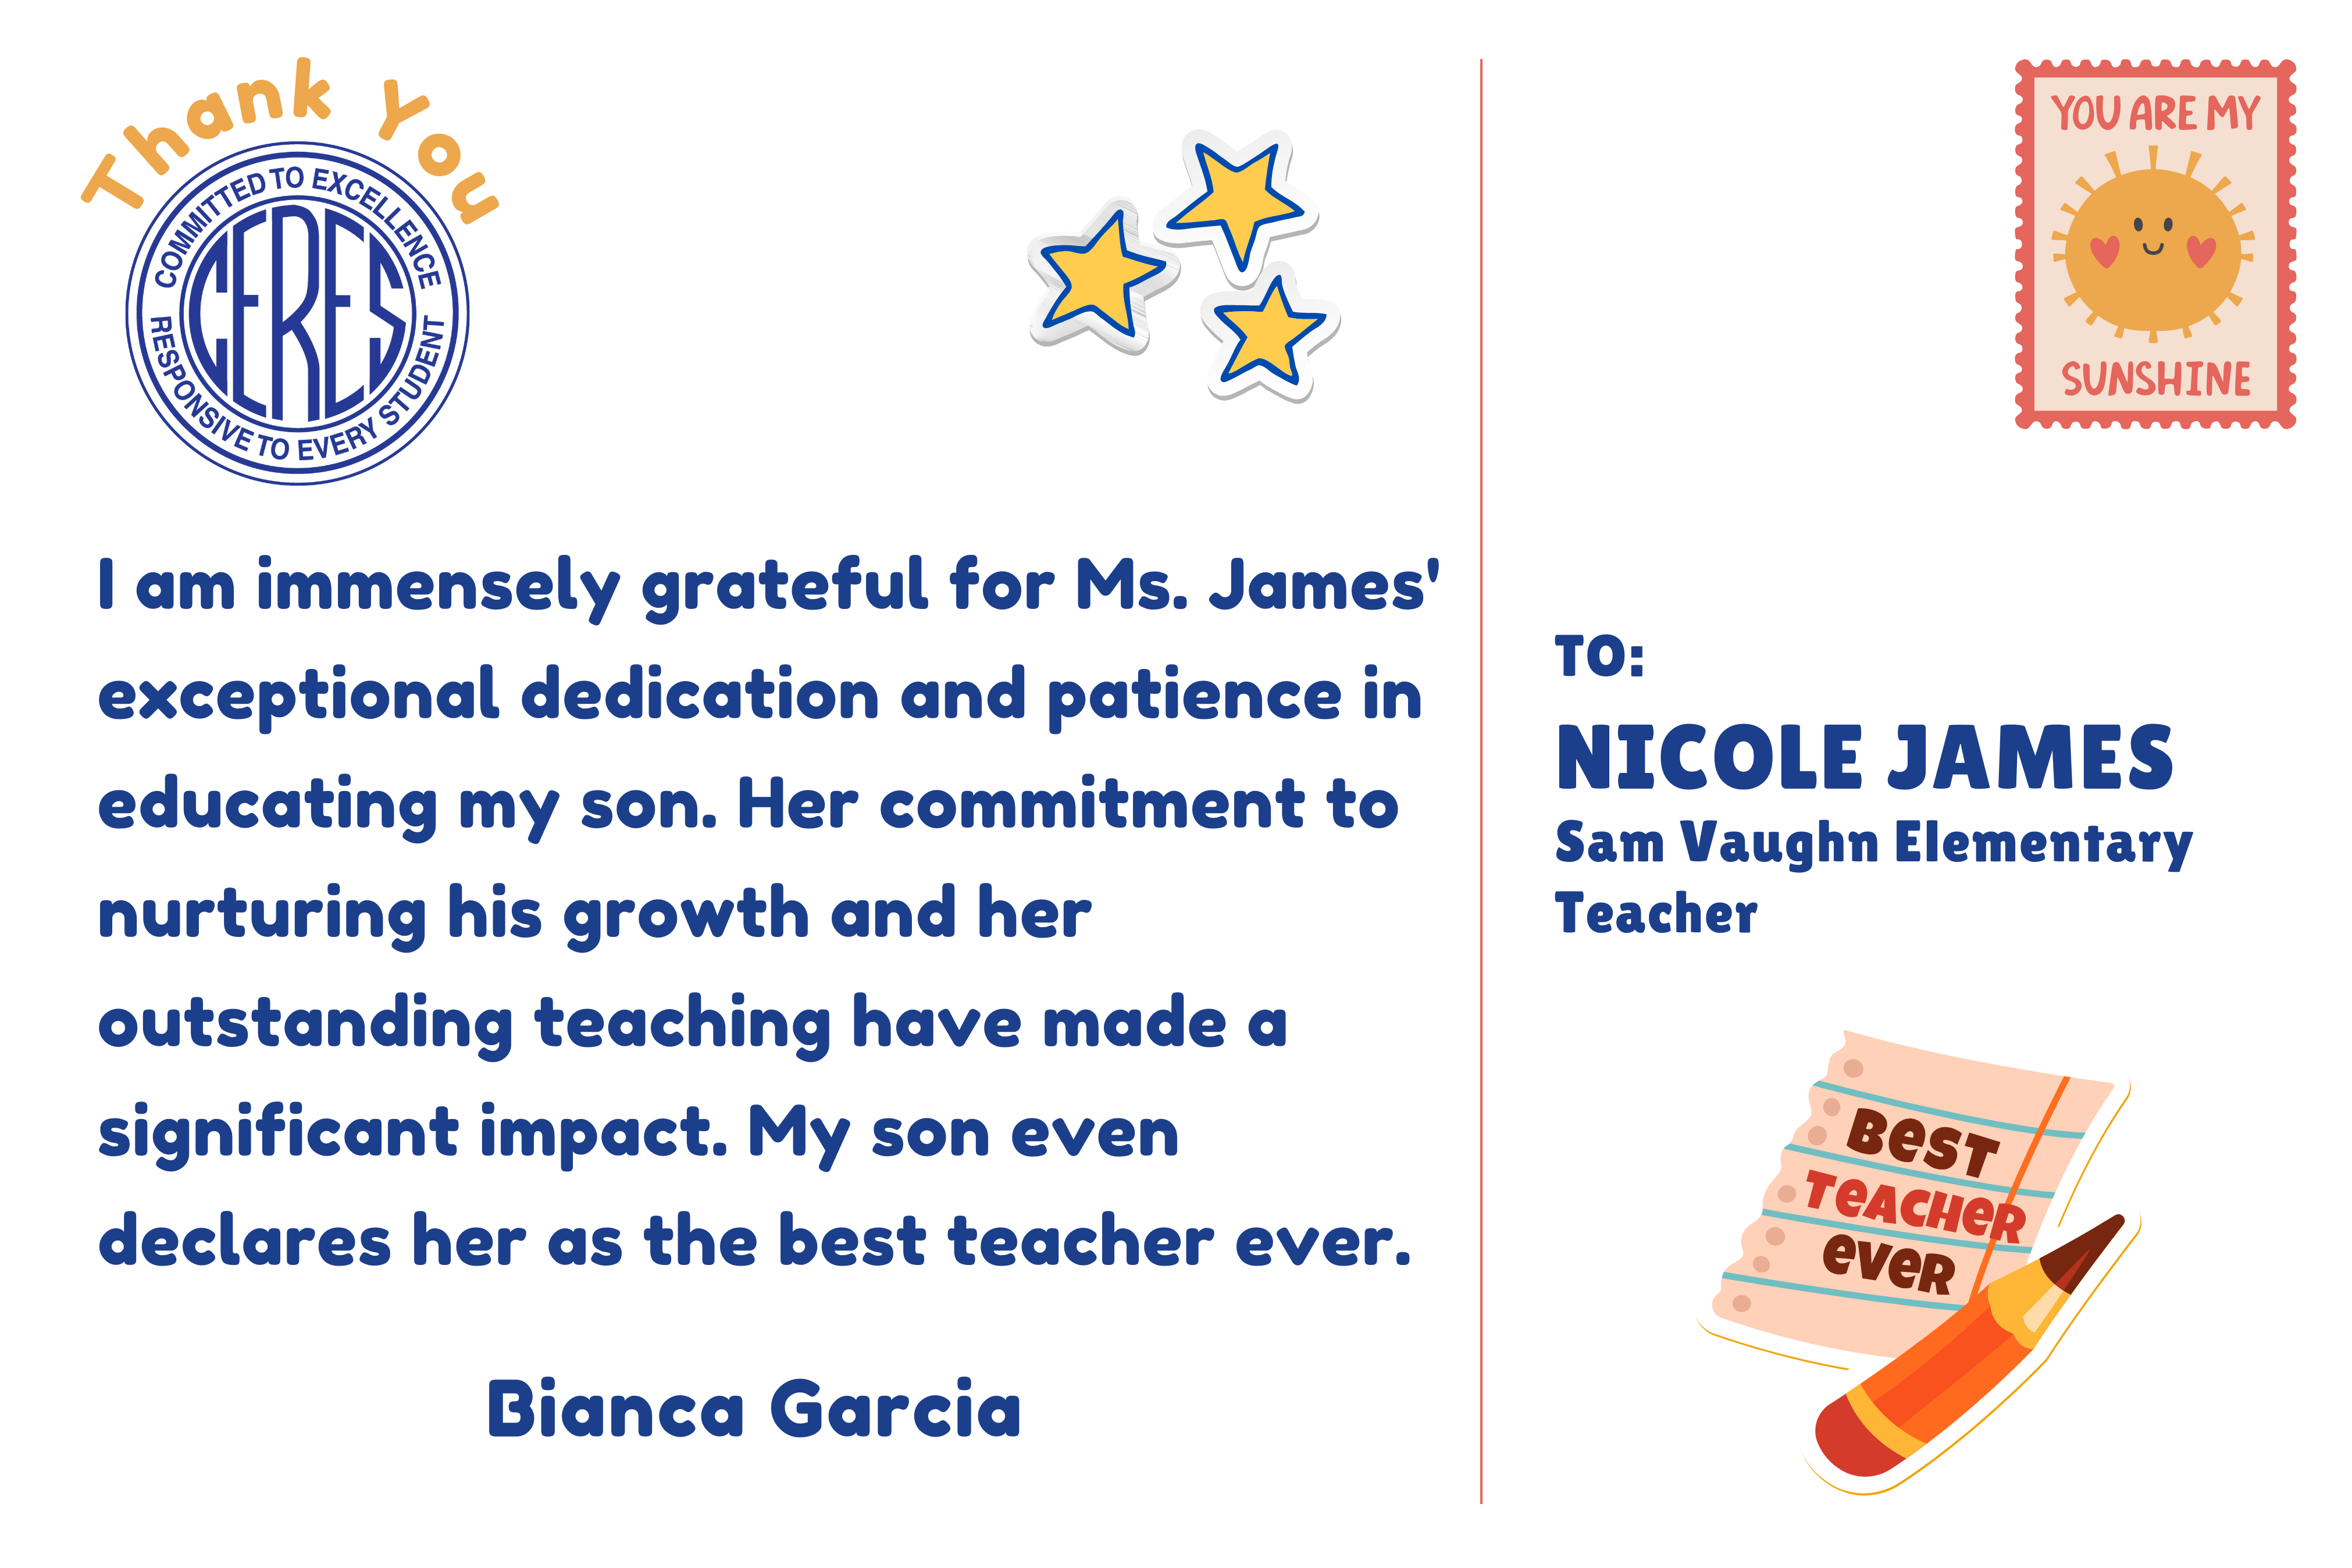 To Sam Vaughn teacher Nicole James from parent Bianca Garcia: I am immensely grateful for Ms. James' exceptional dedication and patience in educating my son. Her commitment to nurturing his growth and her outstanding teaching have made a significant impact. My son even declares her as the best teacher ever.